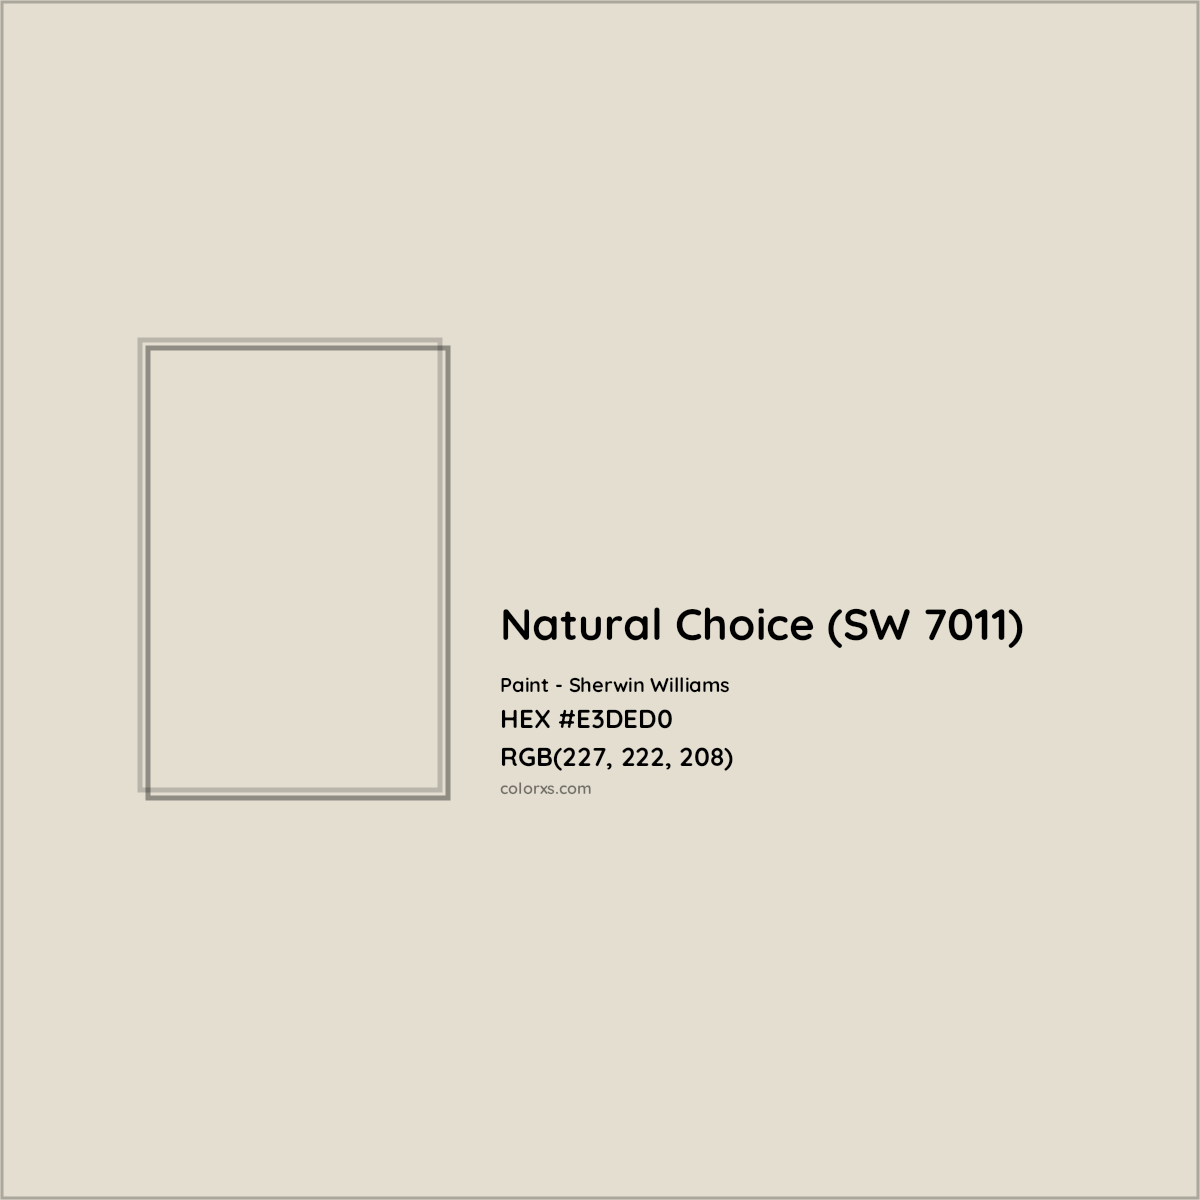 HEX #E3DED0 Natural Choice (SW 7011) Paint Sherwin Williams - Color Code